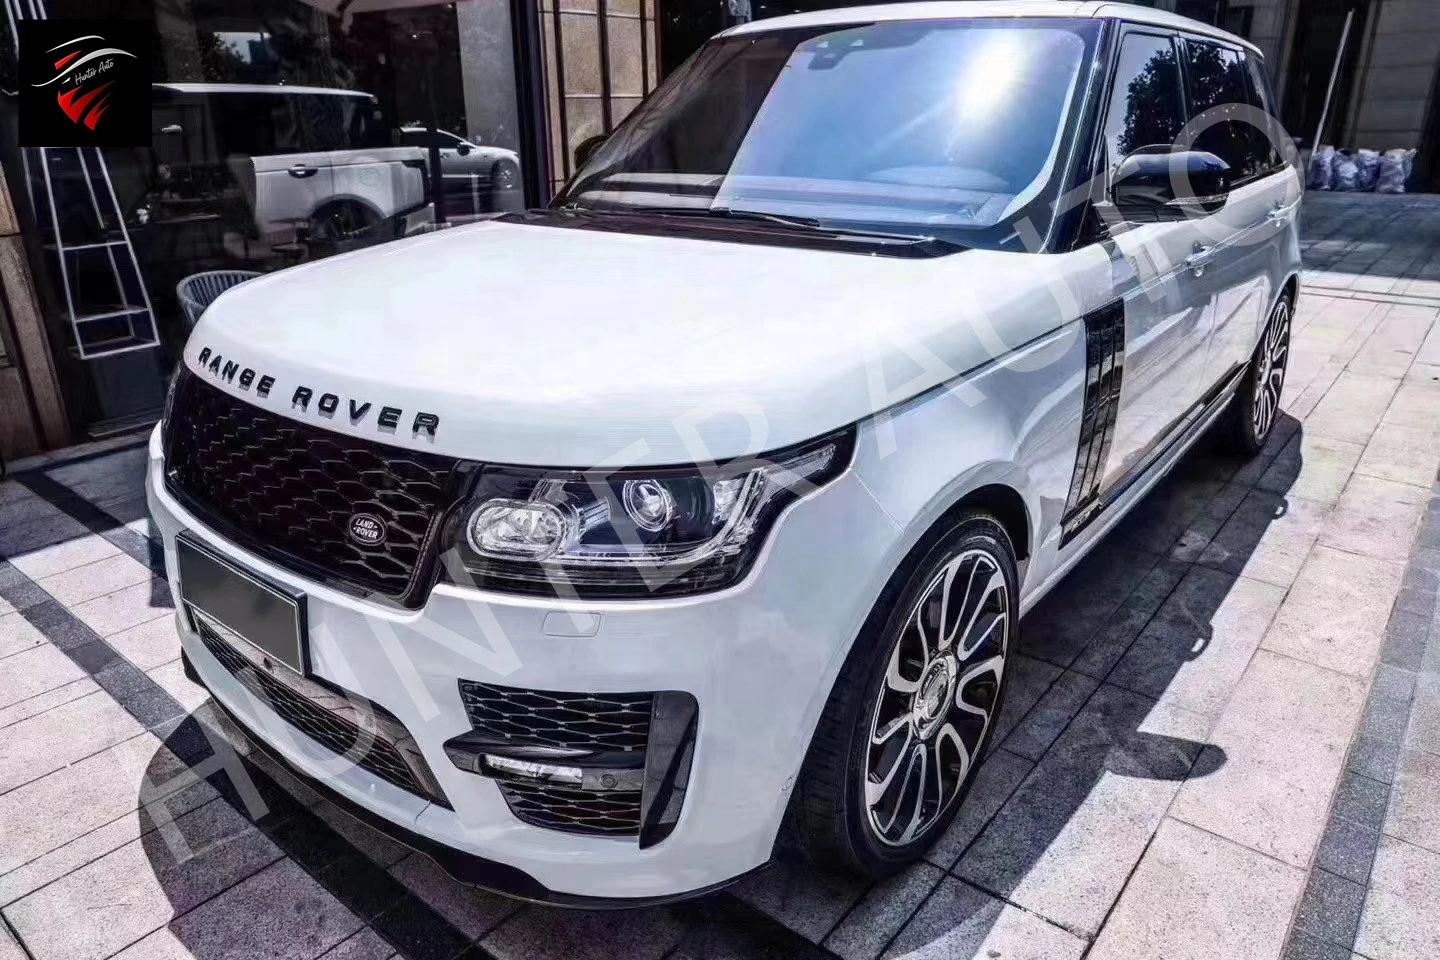 2013-RR vogue upgrade to RR range-rover vogue SVO style body kits